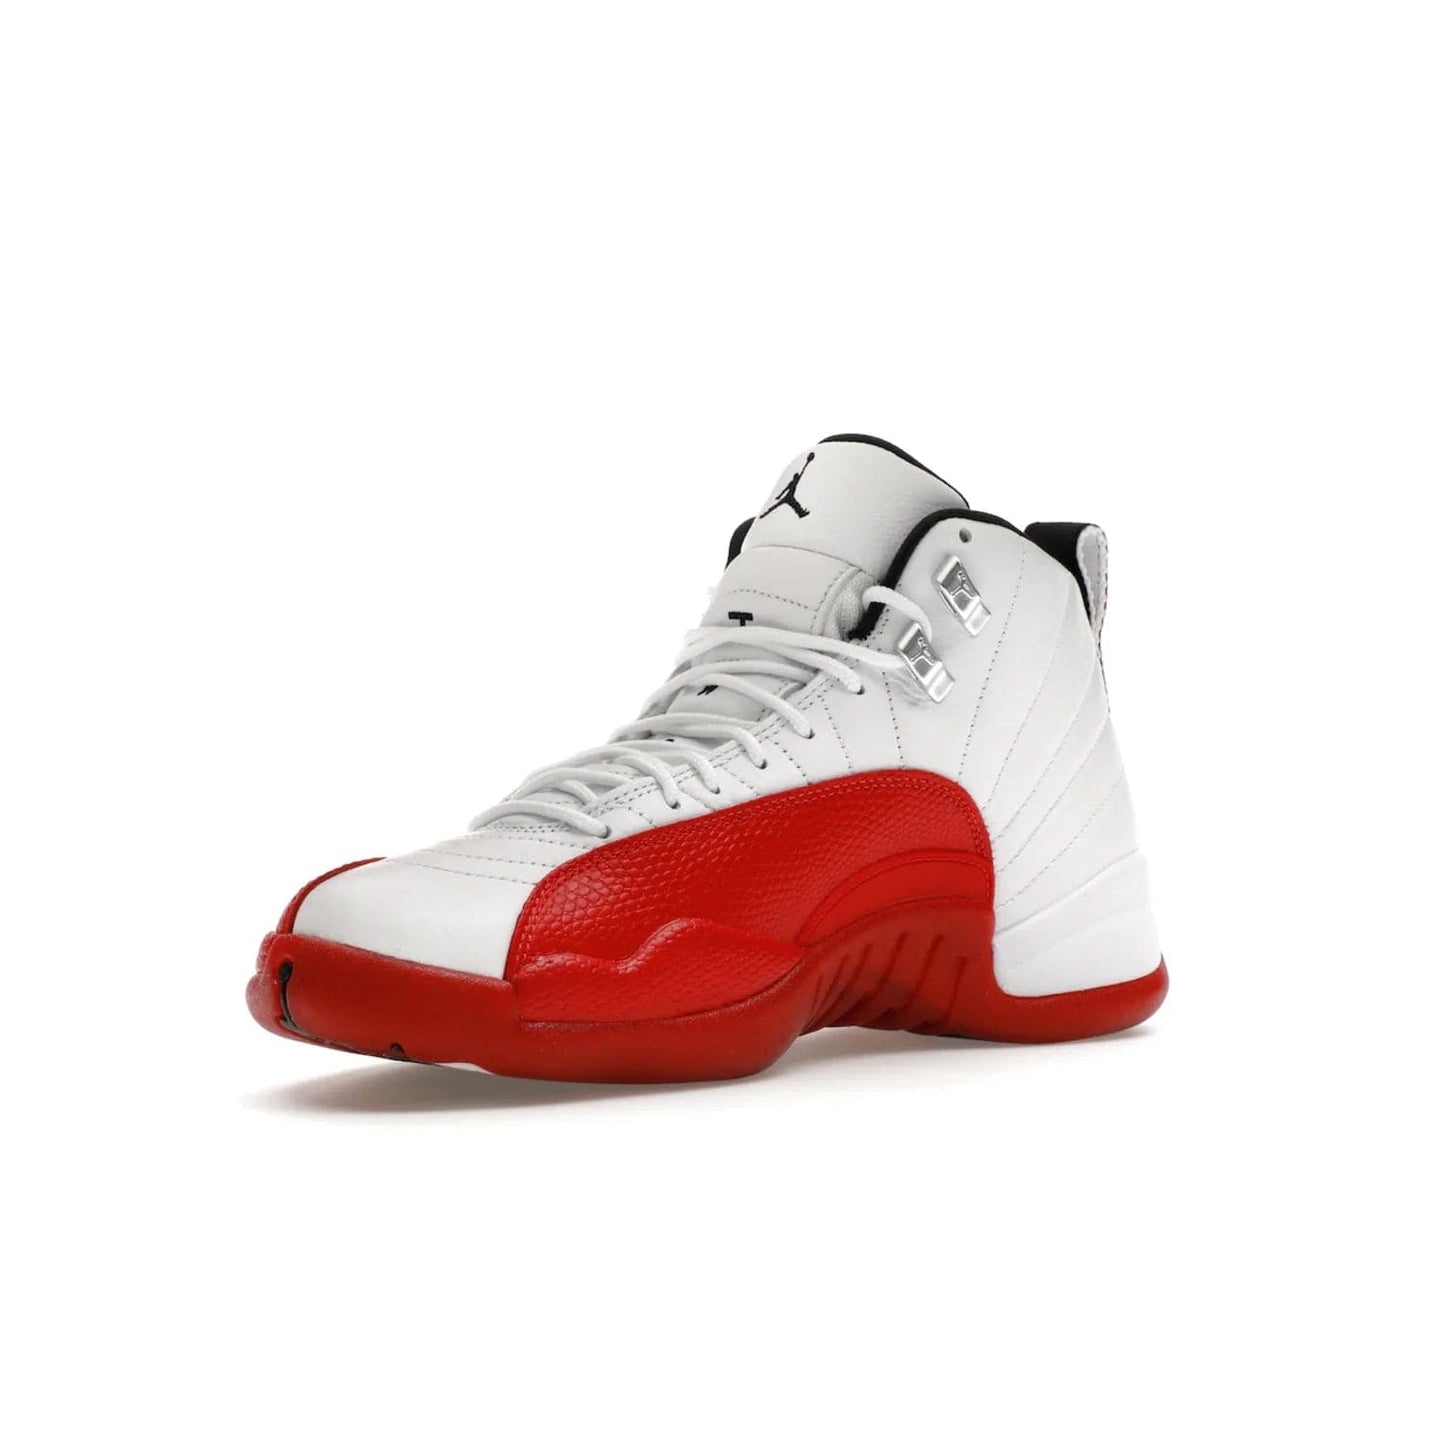 Jordan 12 Retro Cherry (2023) - Image 15 - Only at www.BallersClubKickz.com - Live your sneaker legend with the Jordan 12 Retro Cherry. Iconic pebbled leather mudguards, quilted uppers, and varsity red accents make this 1997 classic a must-have for 2023. Shine on with silver hardware and matching midsoles, and bring it all together for limited-edition style on October 28th. Step into Jordan legacy with the Retro Cherry.